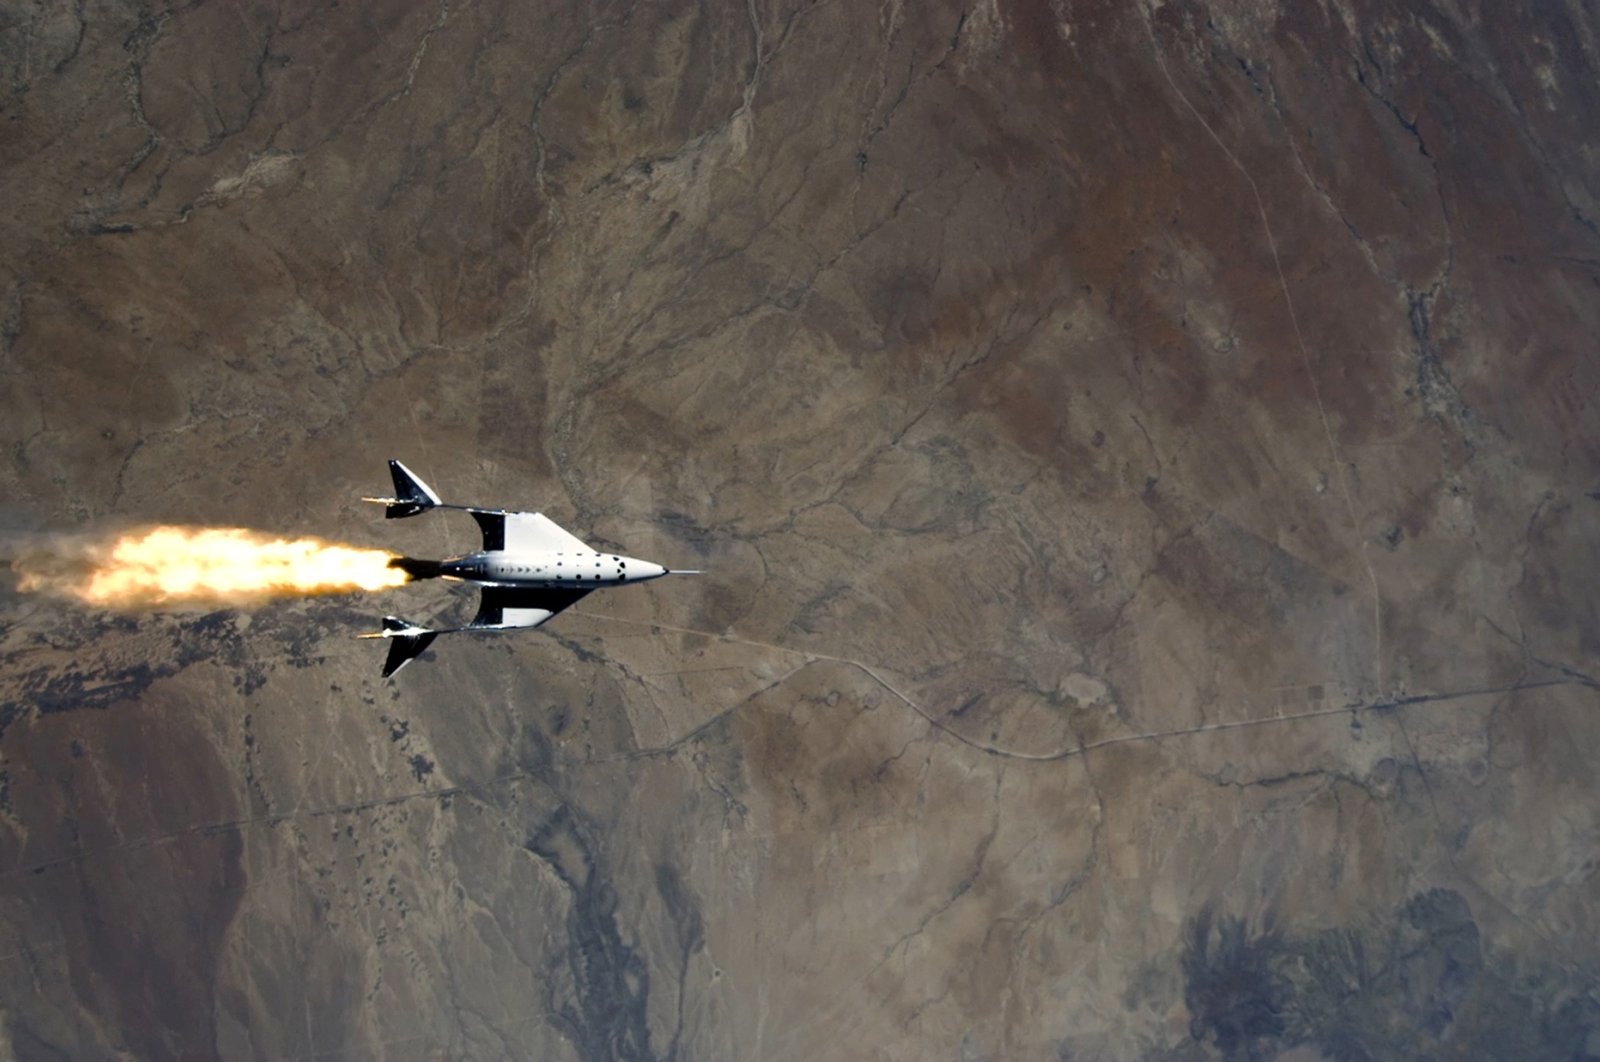 This still image from a video shows Virgin Galactic's VSS Unity starting its engines after release from its mothership as it commences its first spaceflight after launch from Spaceport America, New Mexico, U.S., May 22, 2021. (Reuters Photo)